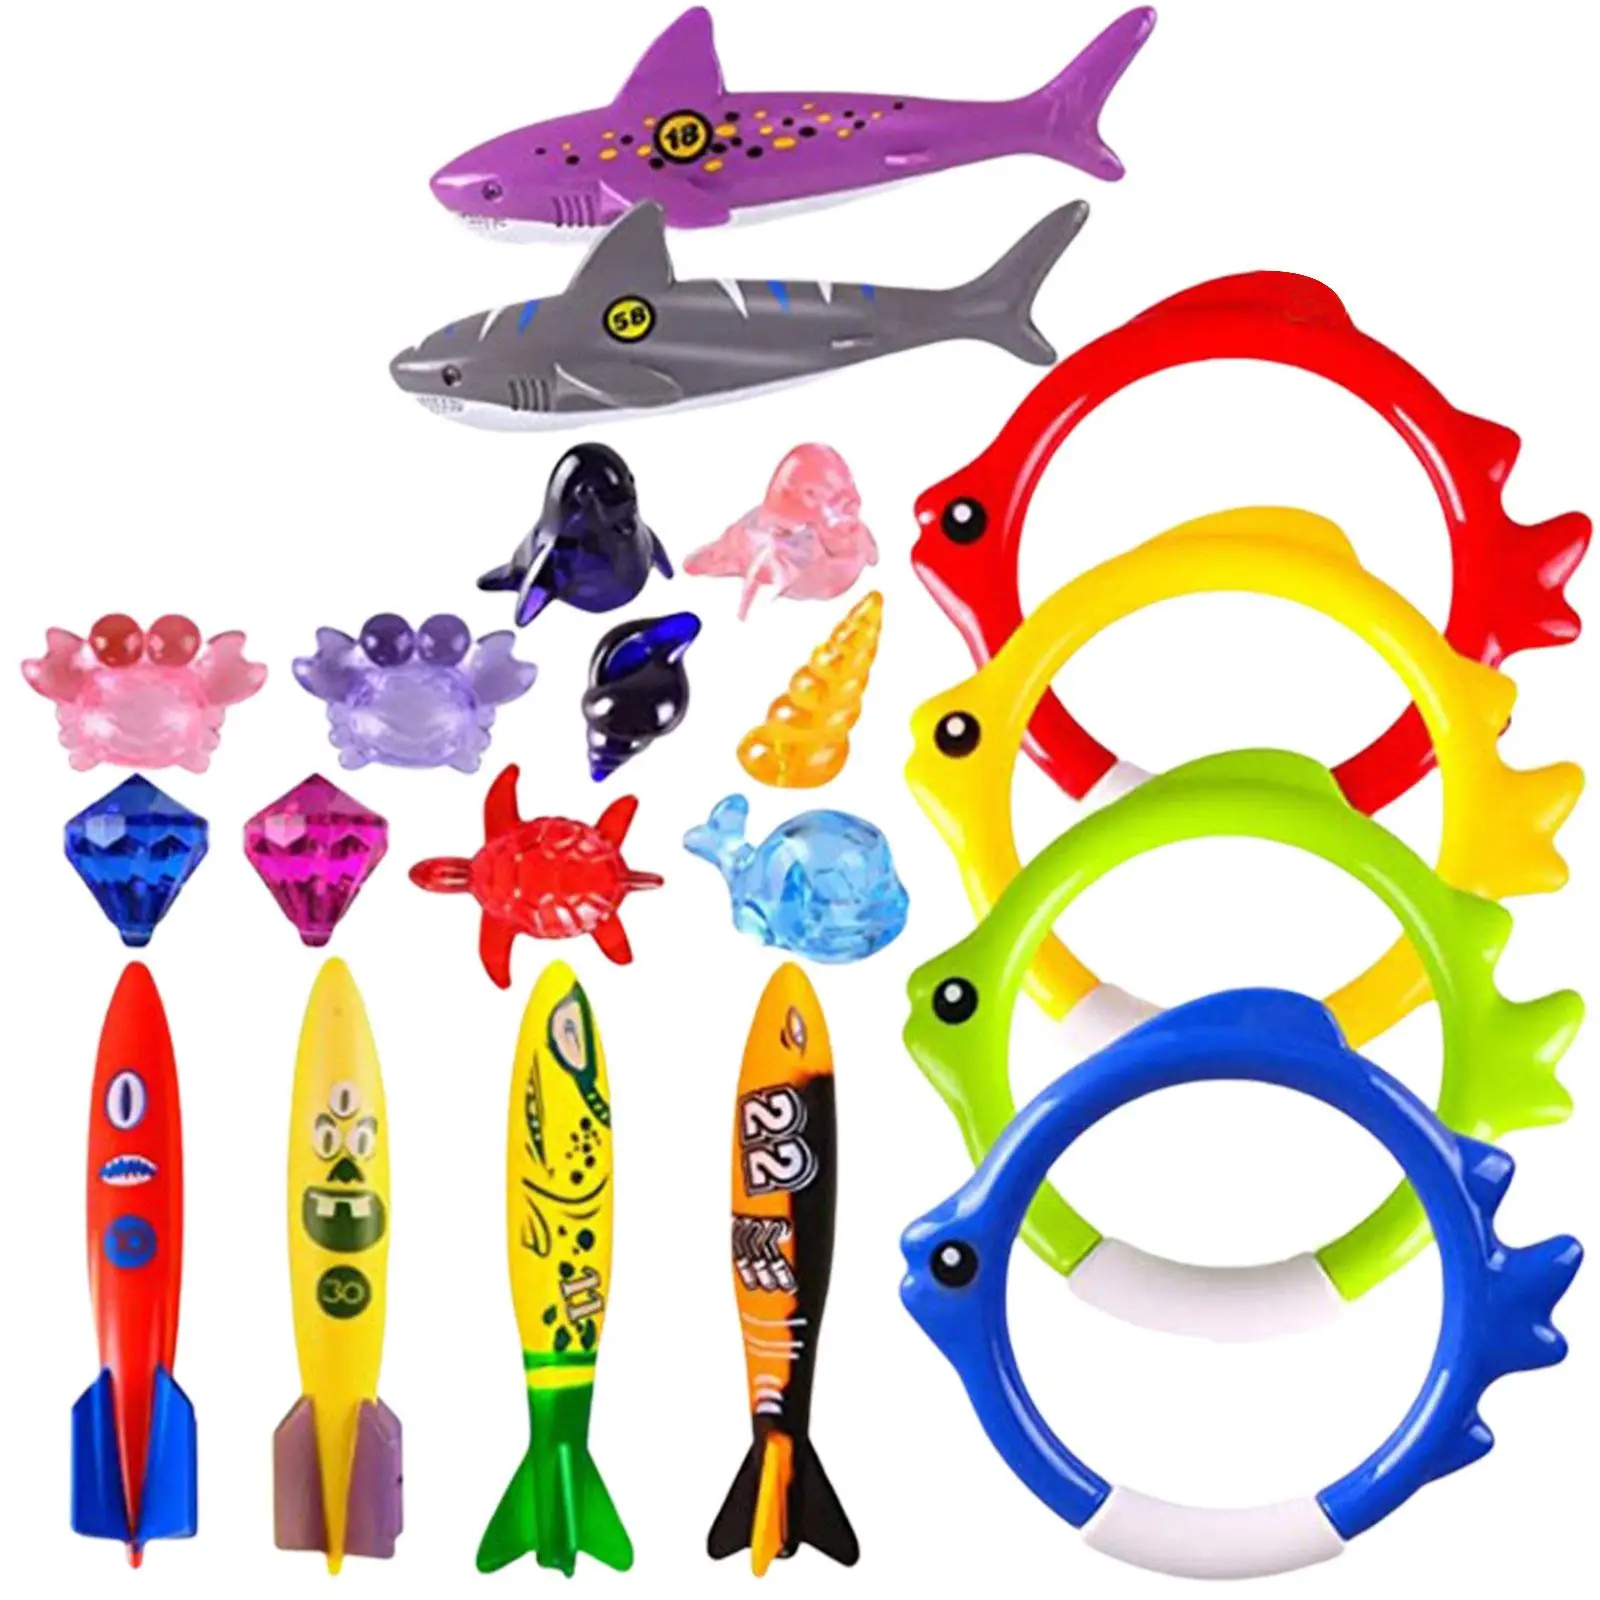 20Pcs Underwater Swimming Pool Toys Sports Activity Toys Sea Animals Toddler Pool Toys for Beach Pool Diving Practice